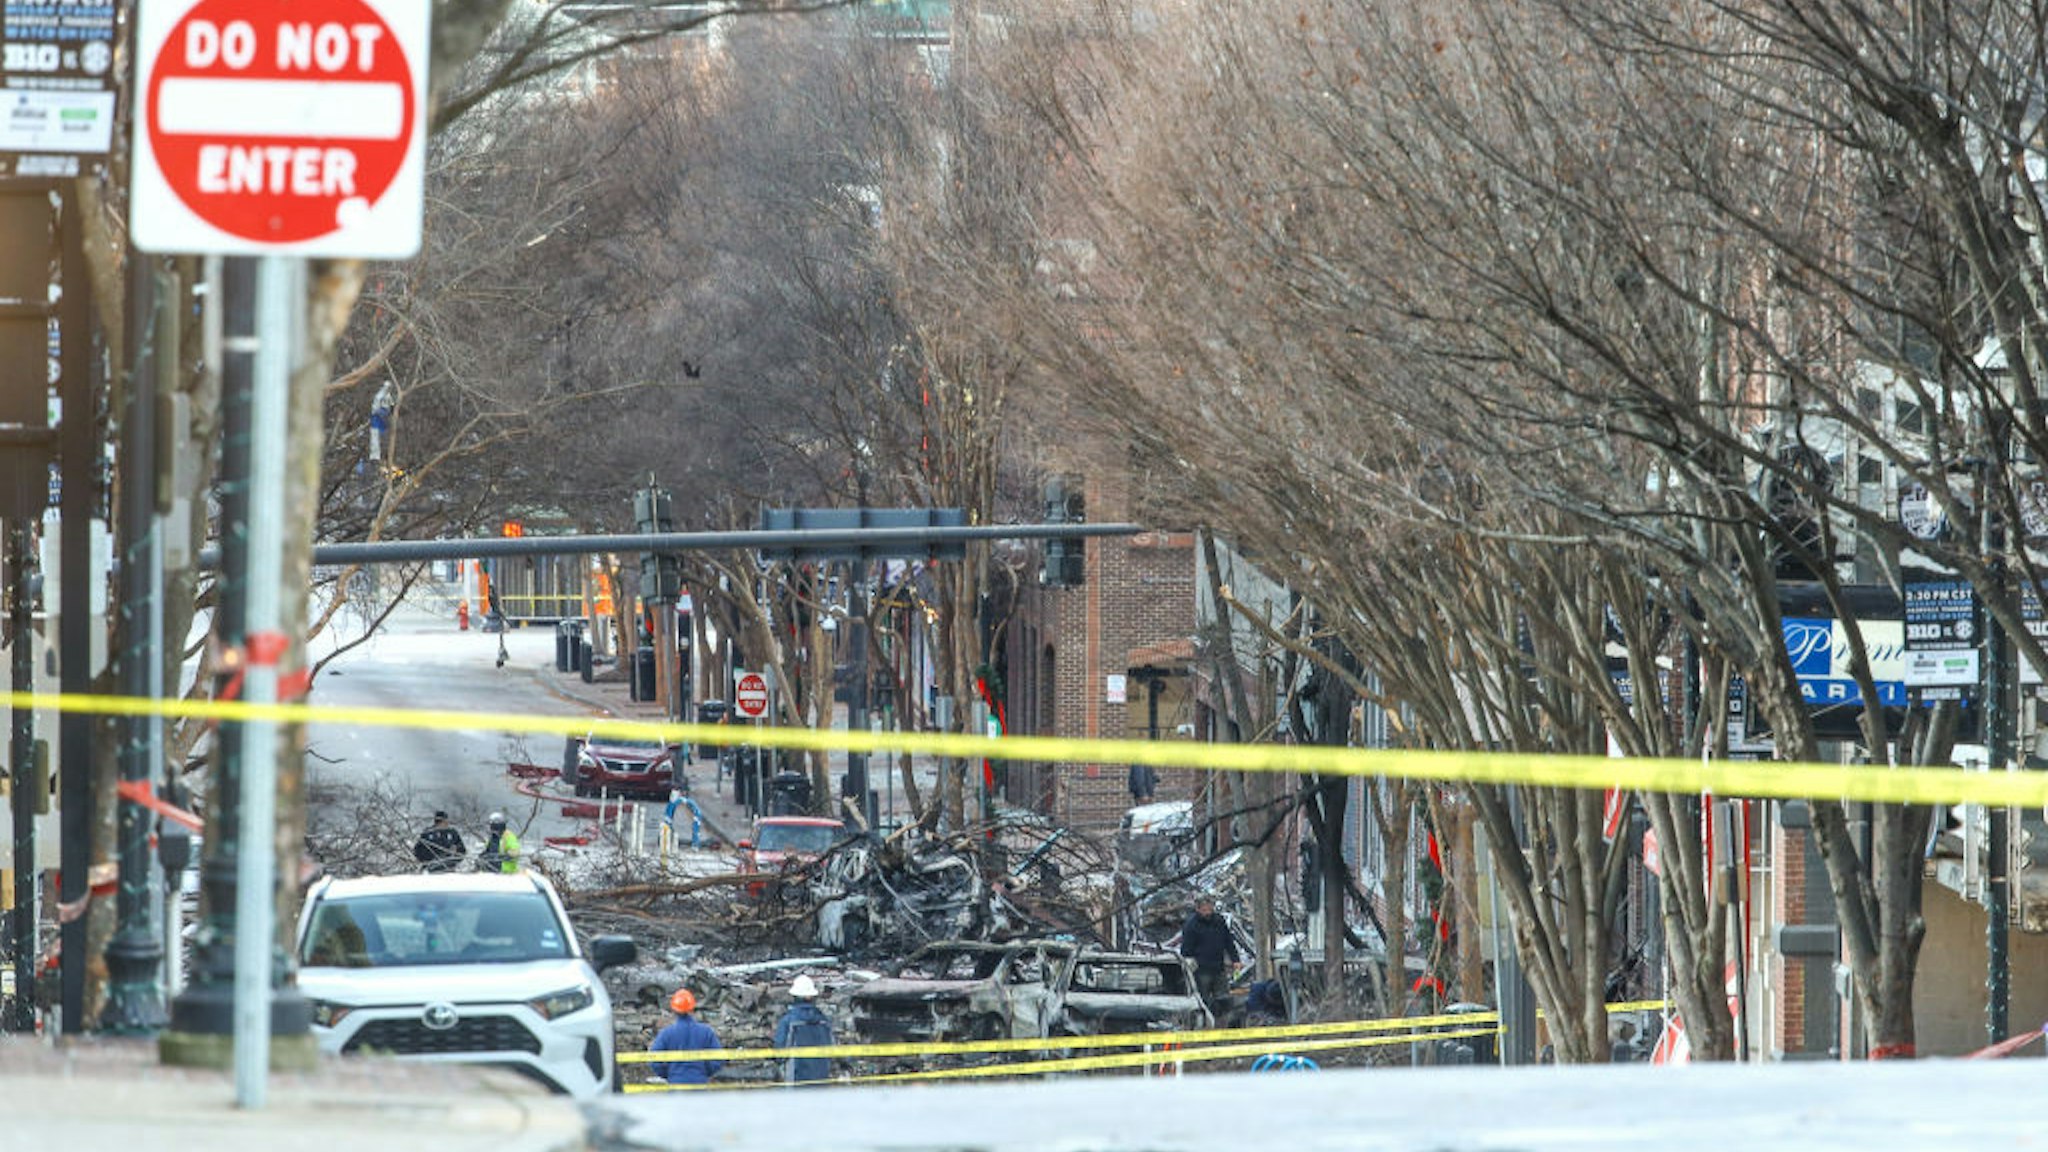 NASHVILLE, TENNESSEE - DECEMBER 25: Police close off an area damaged by an explosion on Christmas morning on December 25, 2020 in Nashville, Tennessee. A Hazardous Devices Unit was en route to check on a recreational vehicle which then exploded, extensively damaging some nearby buildings. According to reports, the police believe the explosion to be intentional, with at least 3 injured and human remains found in the vicinity of the explosion